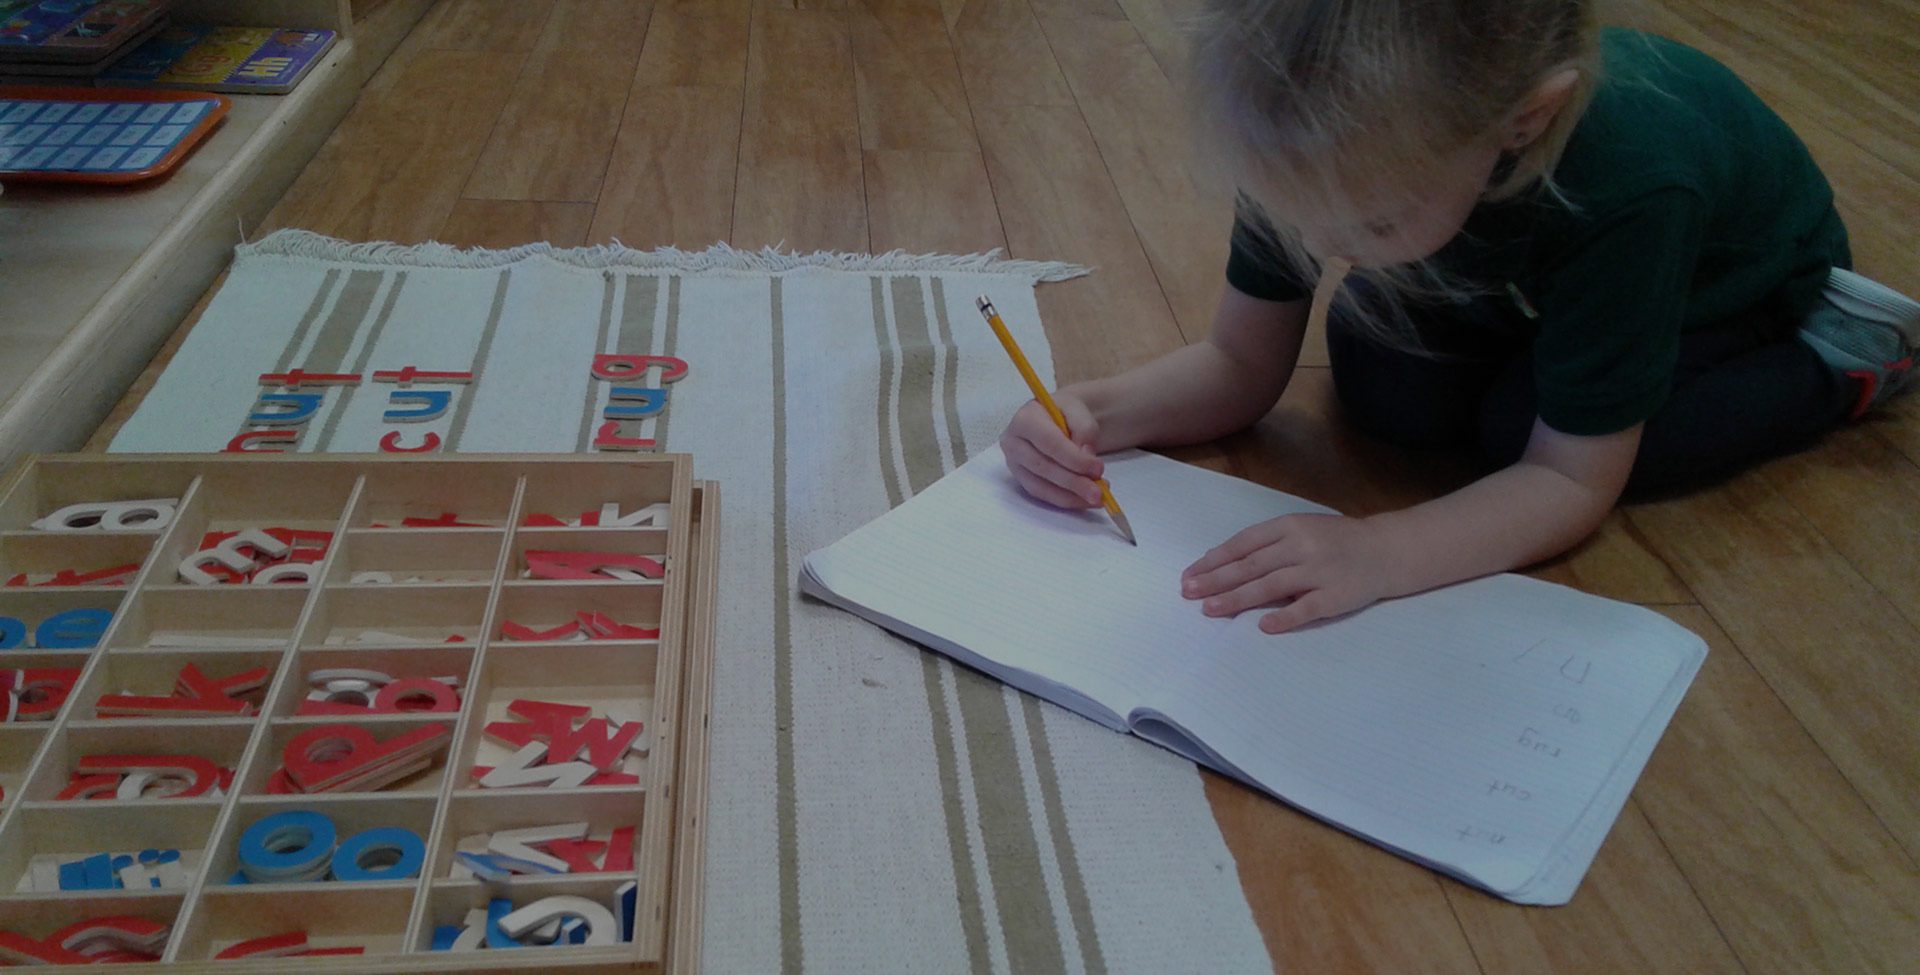 A child tracing letters in a notebook at Meadow Montessori School in South Richmond, TX